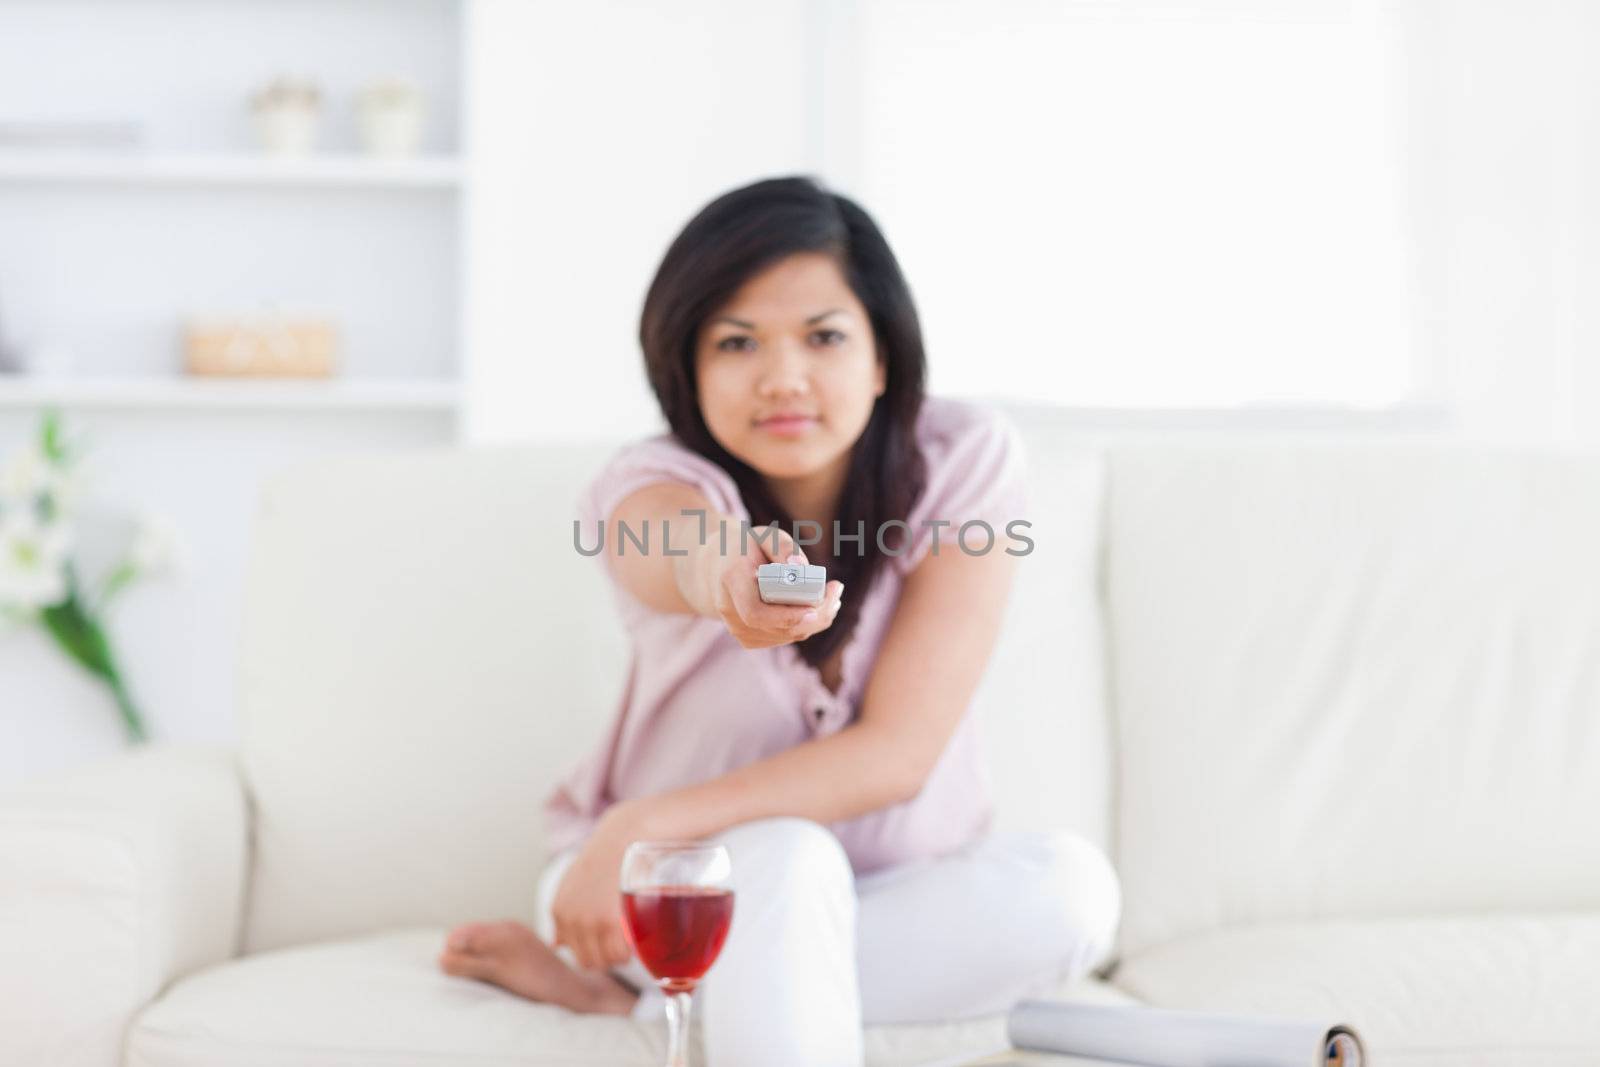 Woman pressing on a television remote in a living room